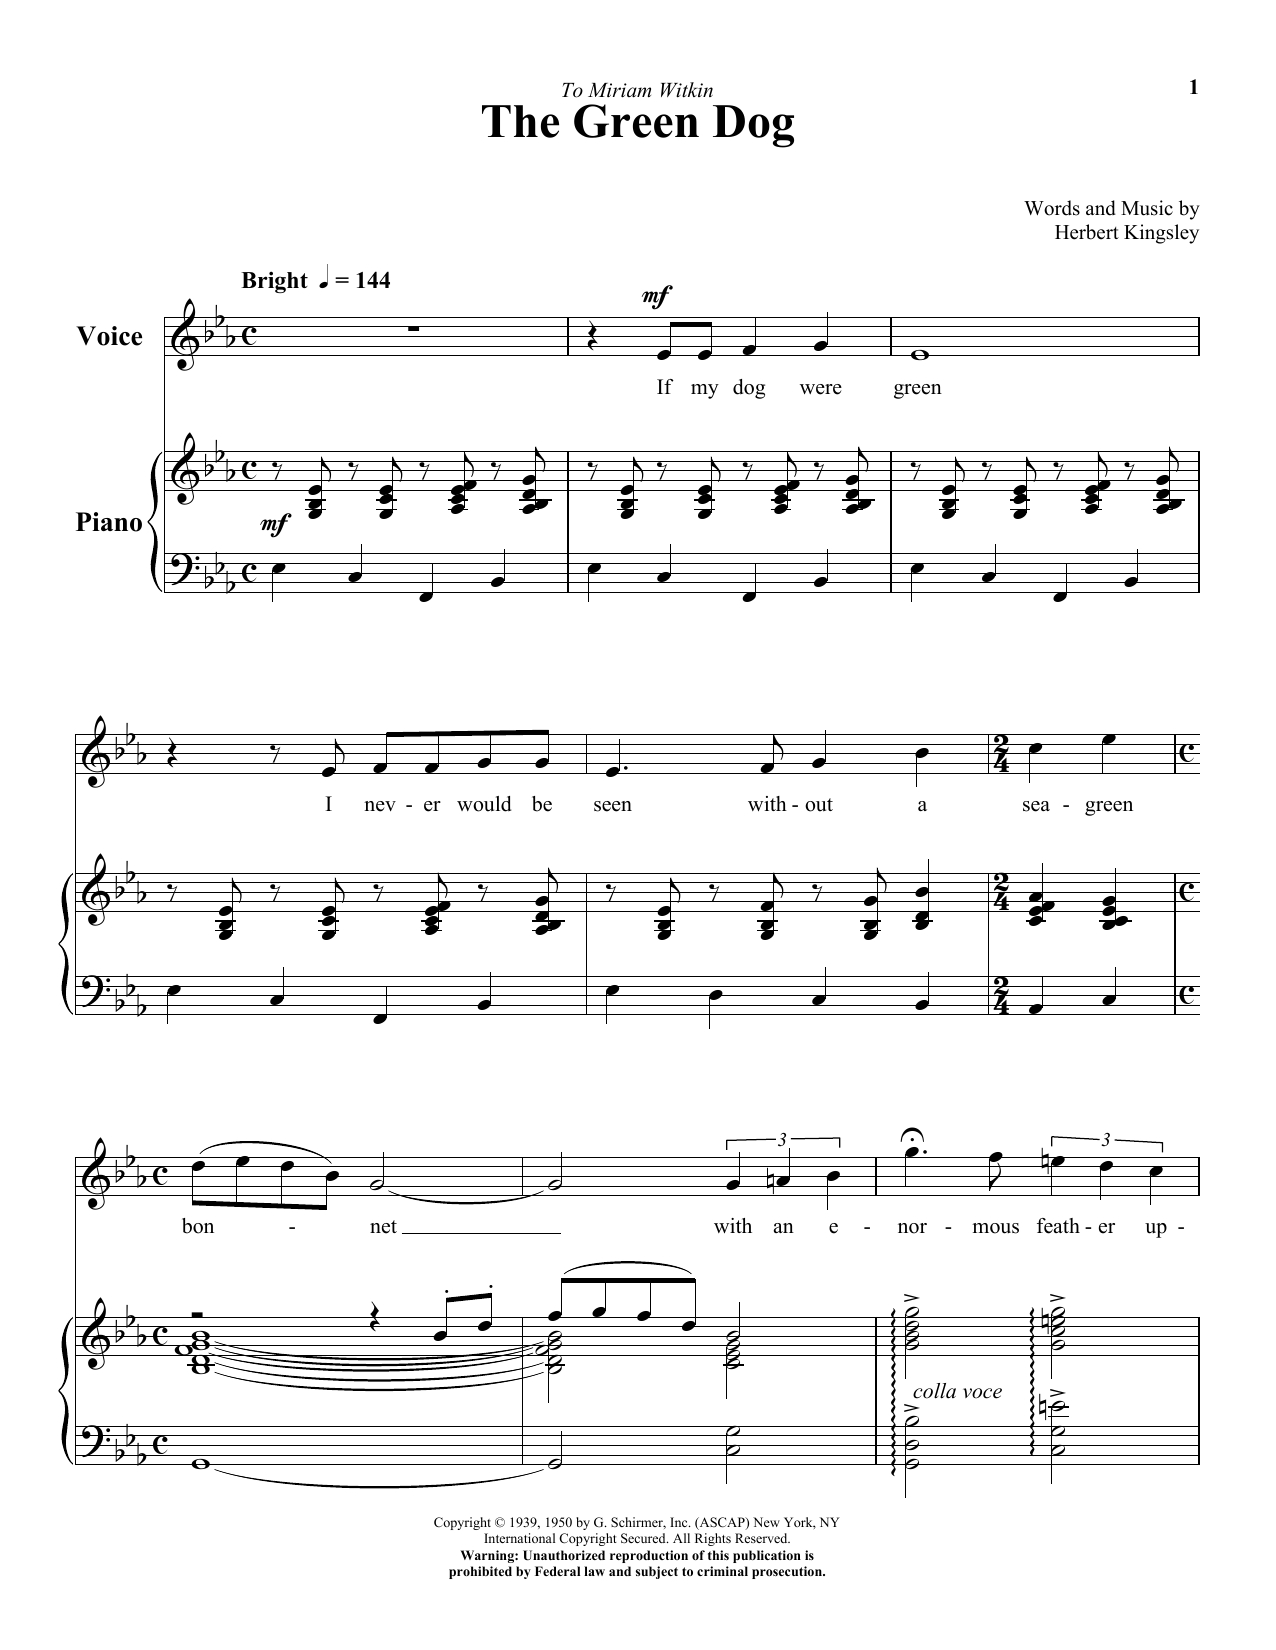 The Green Dog Sheet Music | Herbert Kingsley | Piano &amp; Vocal - Free Printable Sheet Music For Voice And Piano